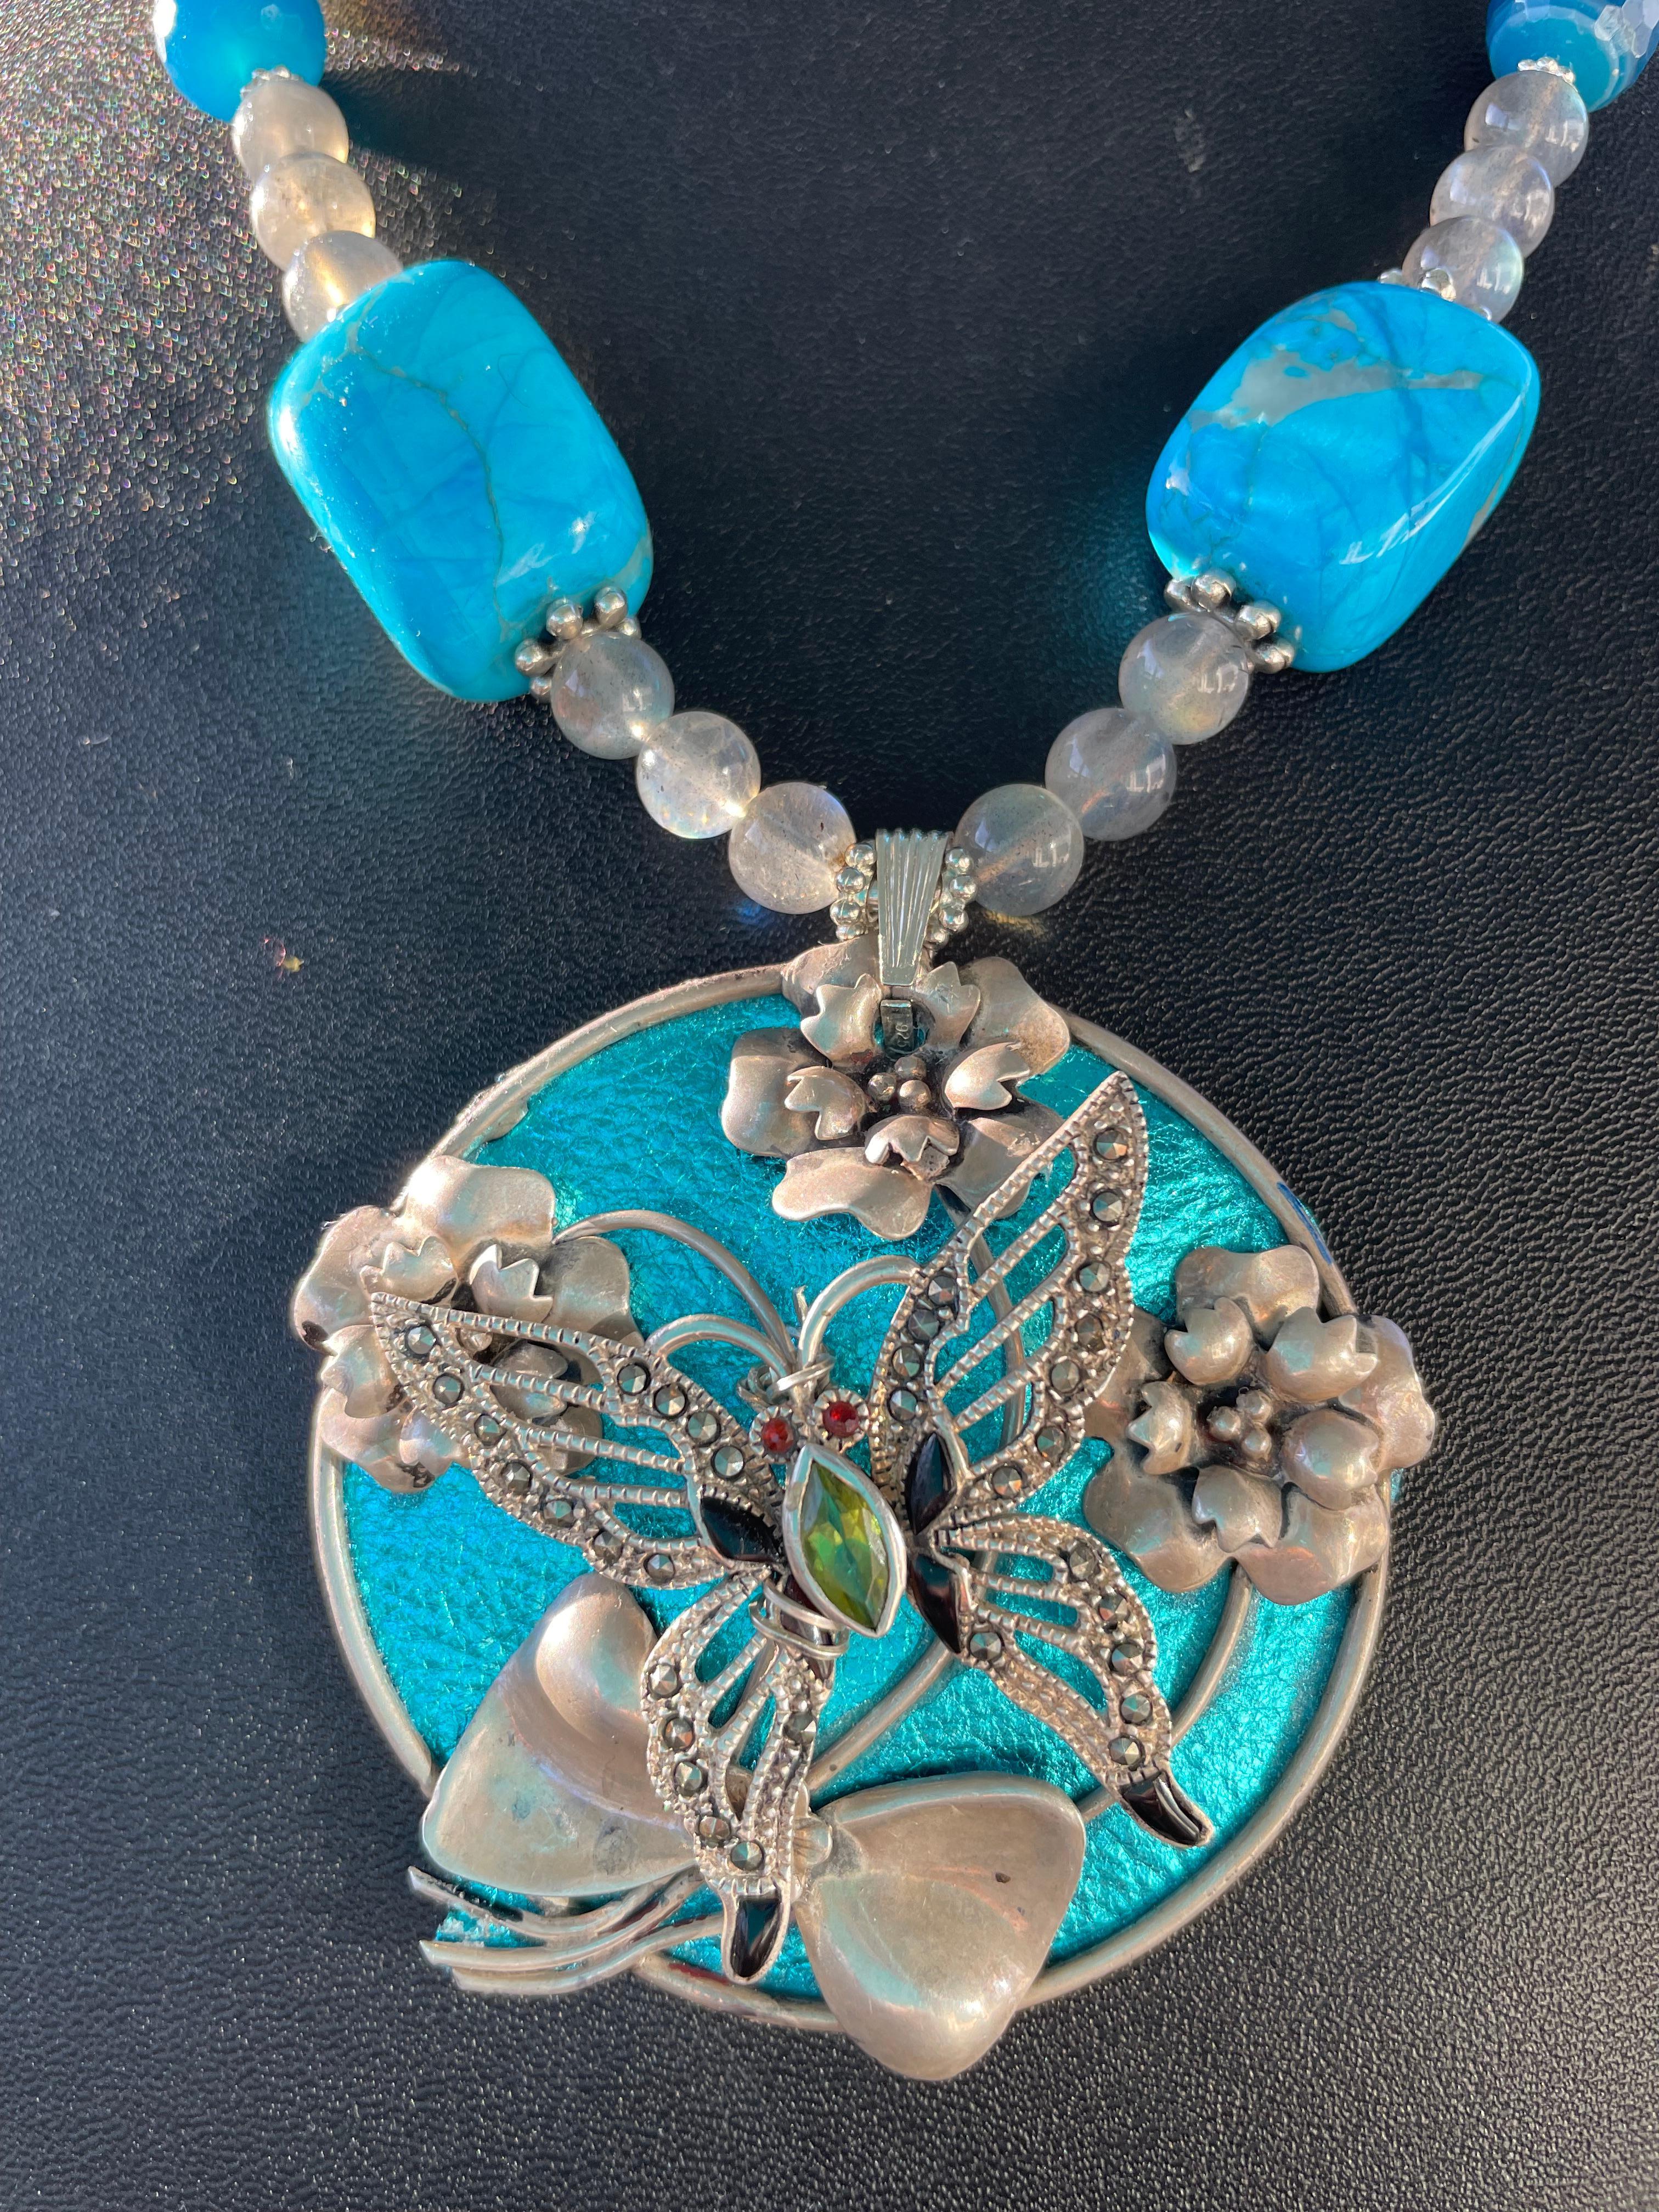 Lorraine’s Bijoux offers a Stunning and Unique pendant necklace consisting of two vintage Sterling Silver brooches ( one round floral and one marcasite inlaid ) with a background of metallic Tuquoise yummy leather. This piece is Fabulous and is a